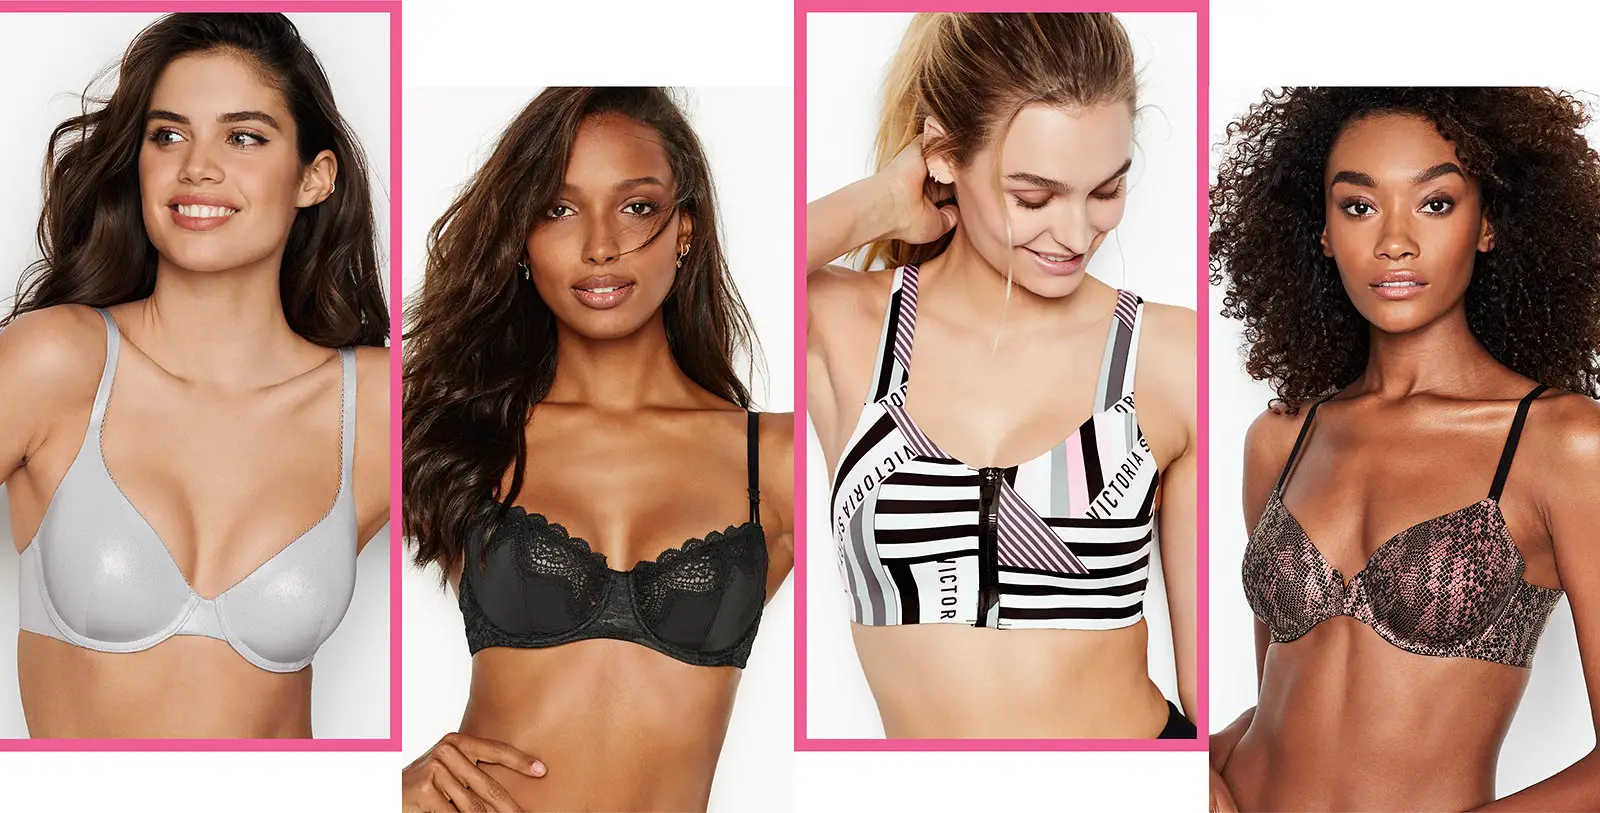 Enter for your chance to win a Victoria’s Secret Gift Card.